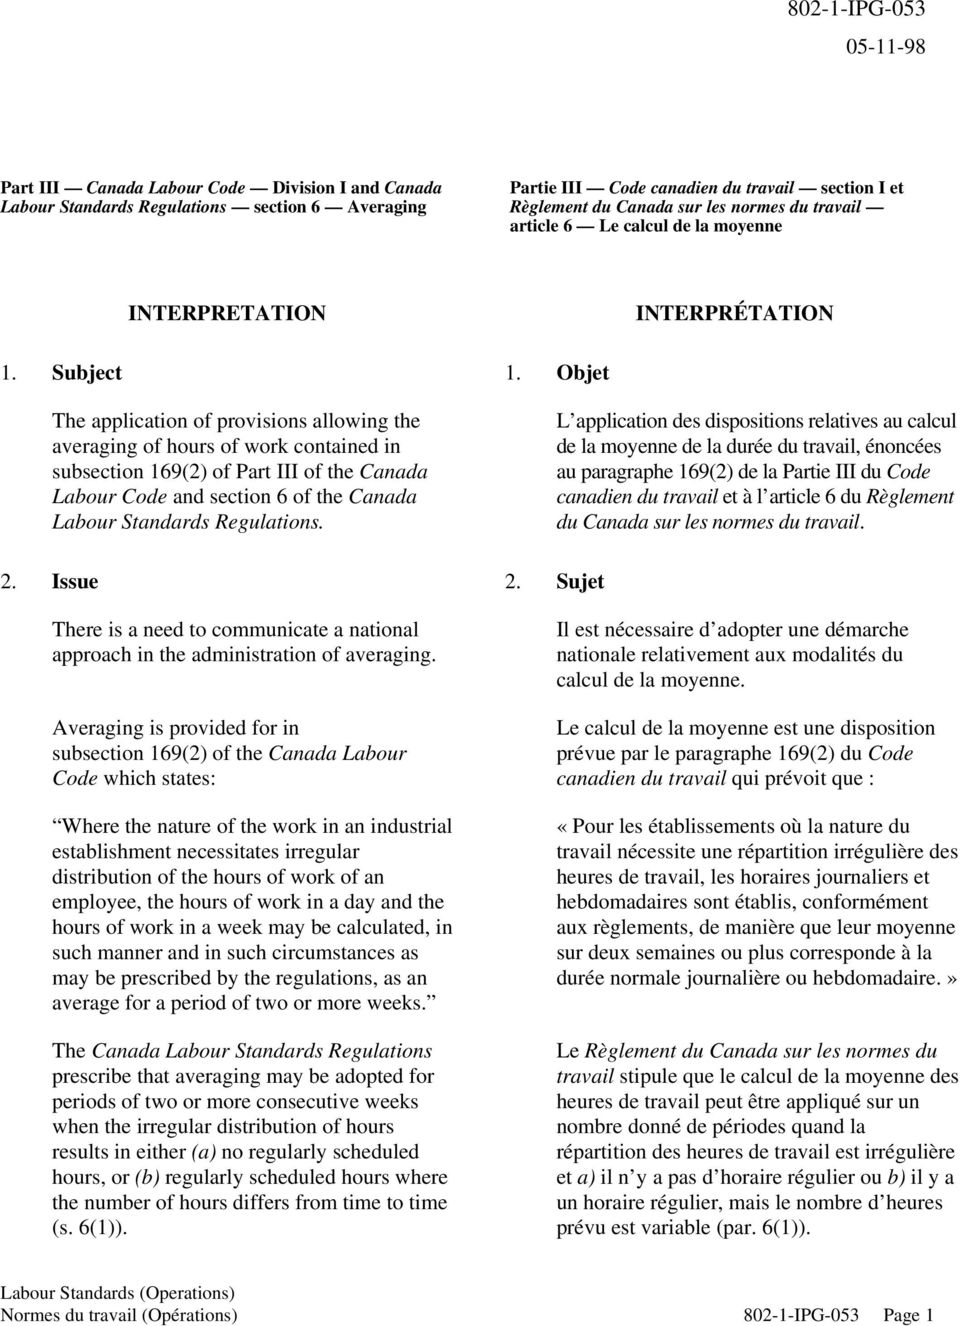 Objet The application of provisions allowing the averaging of hours of work contained in subsection 169(2) of Part III of the Canada Labour Code and section 6 of the Canada Labour Standards